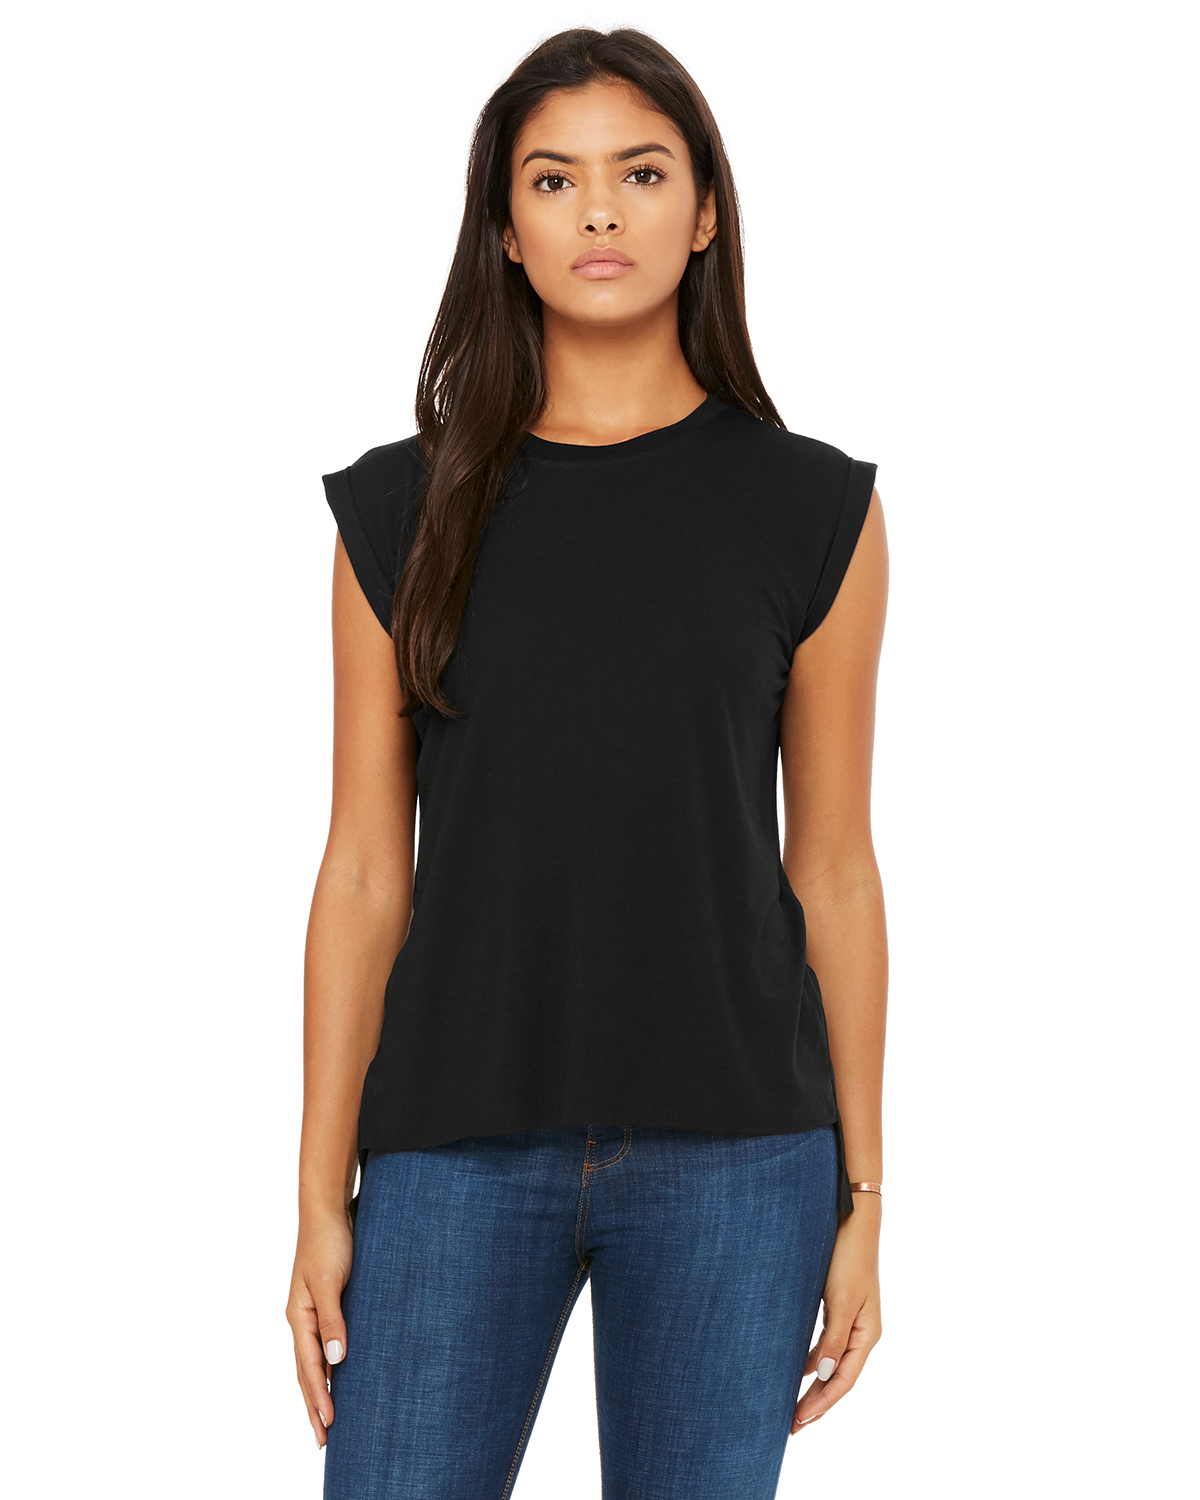 Bella + Canvas Ladies' Flowy Muscle T-Shirt with Rolled Cuff